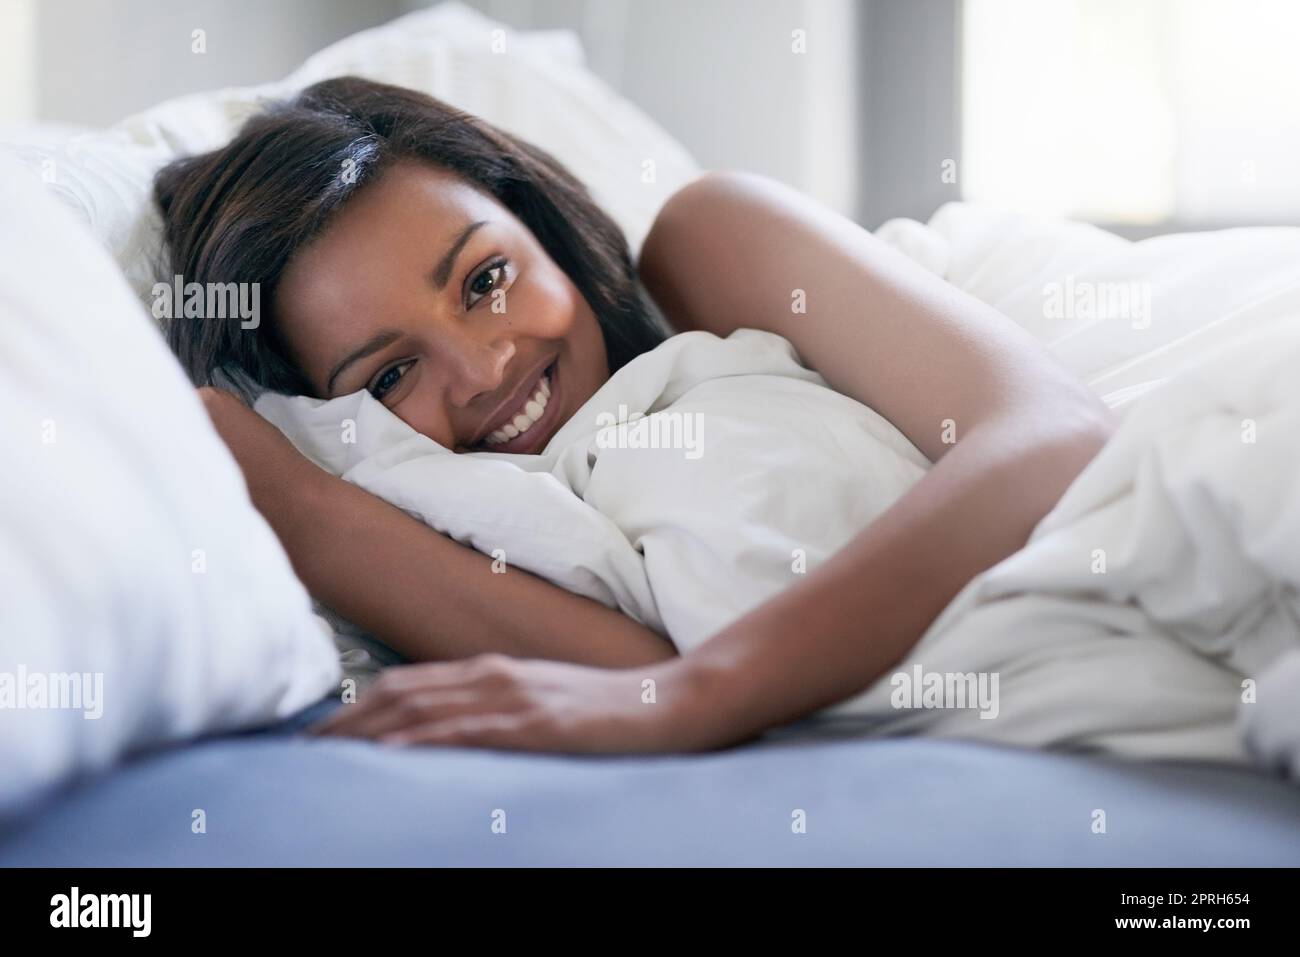 Saturday is my duvet day. a happy young woman waking up in her bed at home. Stock Photo